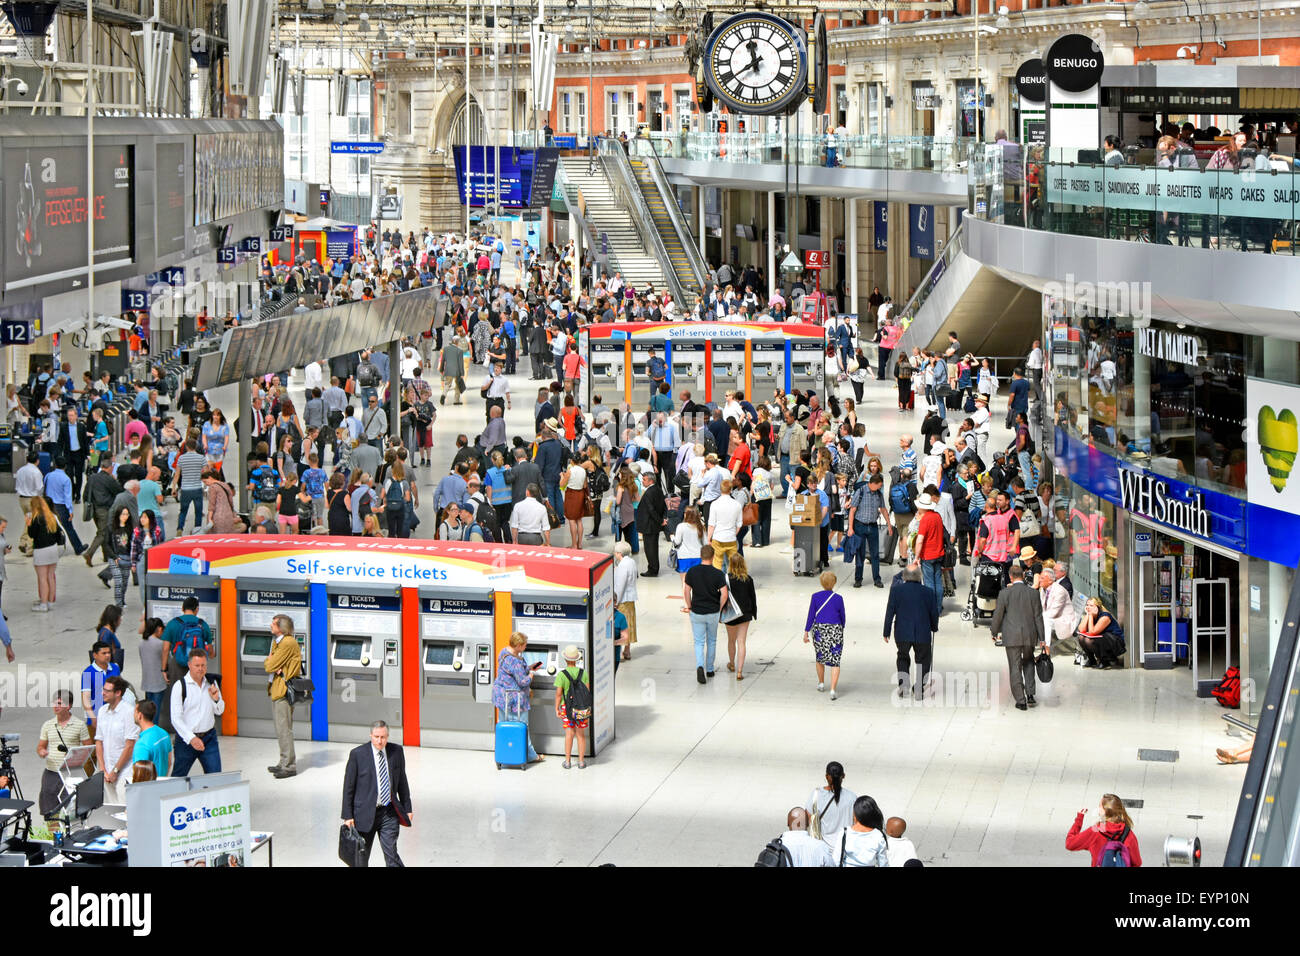 Commuters on Waterloo train station concourse with station clock self service train ticket machines retail shops & balconies London England UK Stock Photo